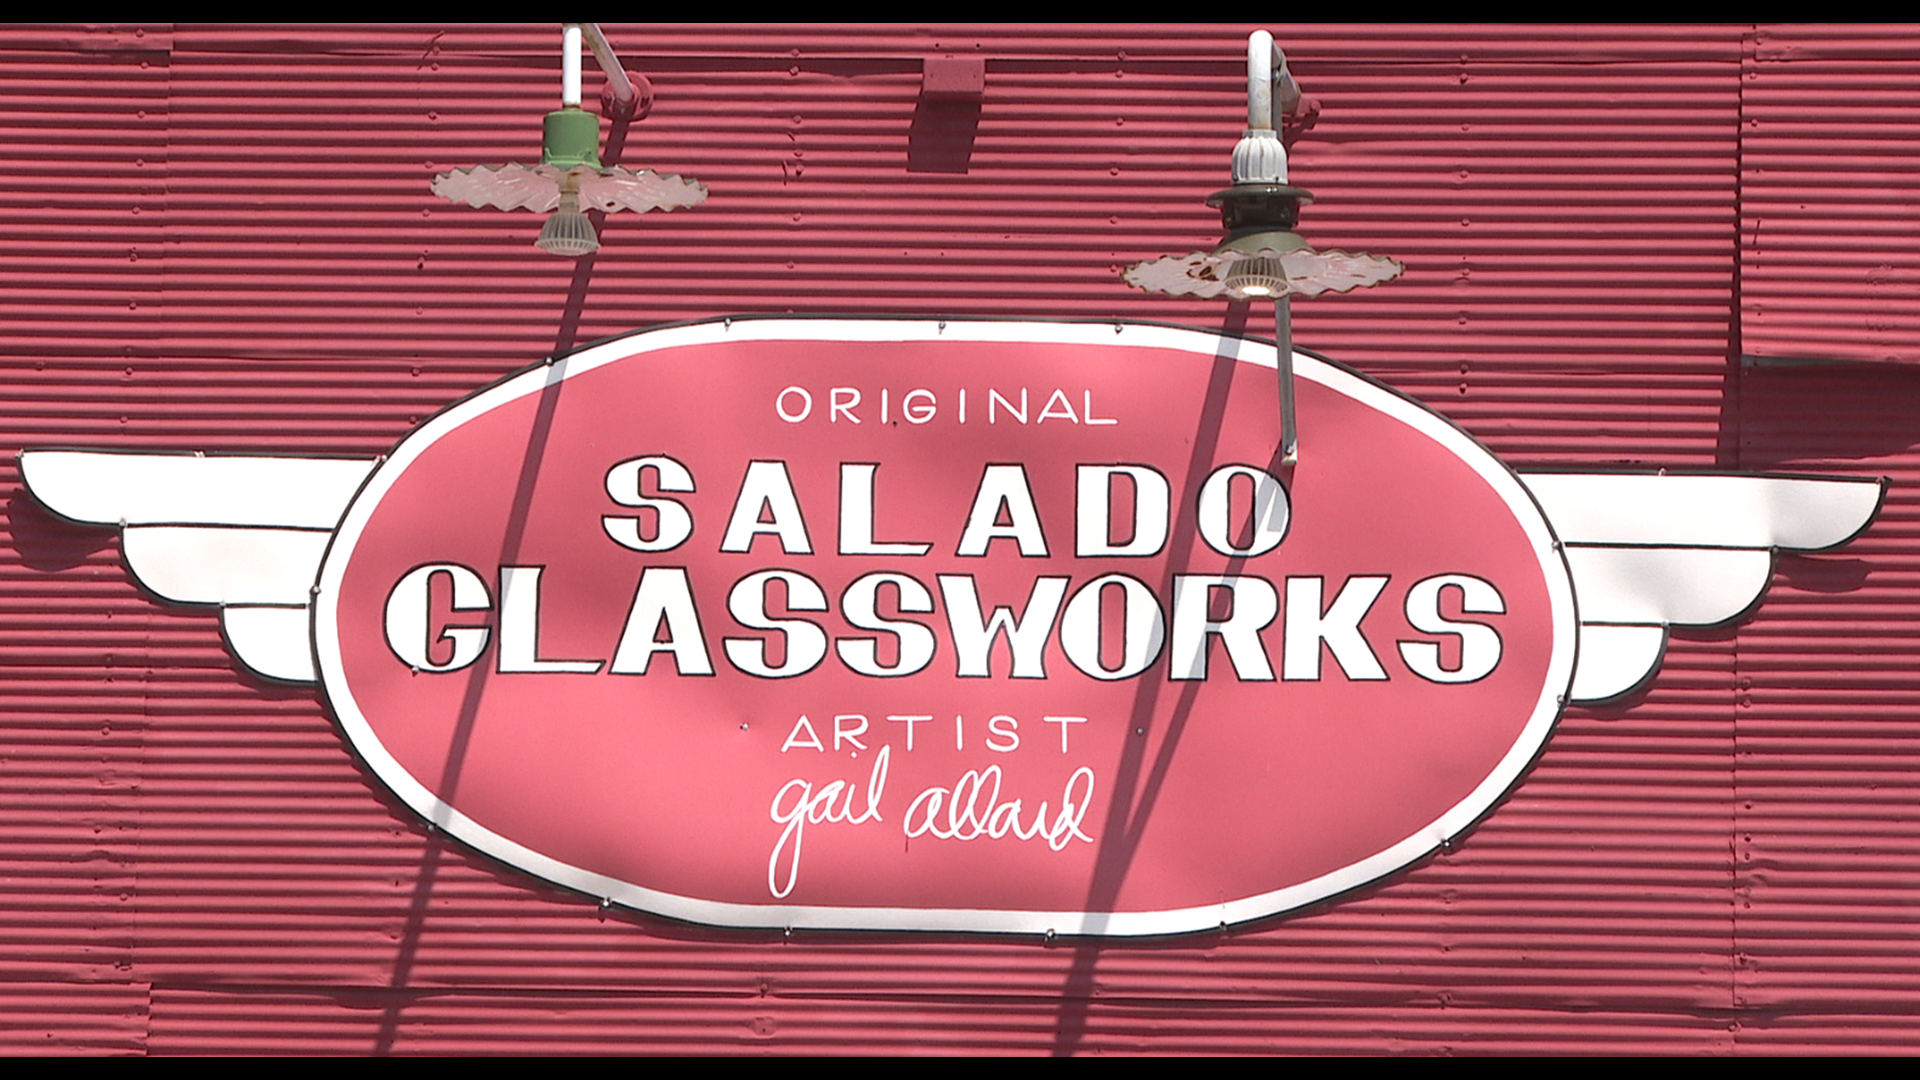 The village of Salado is losing a staple of its arts community: Salado Glassworks. The shop is relocating down the road to Georgetown.